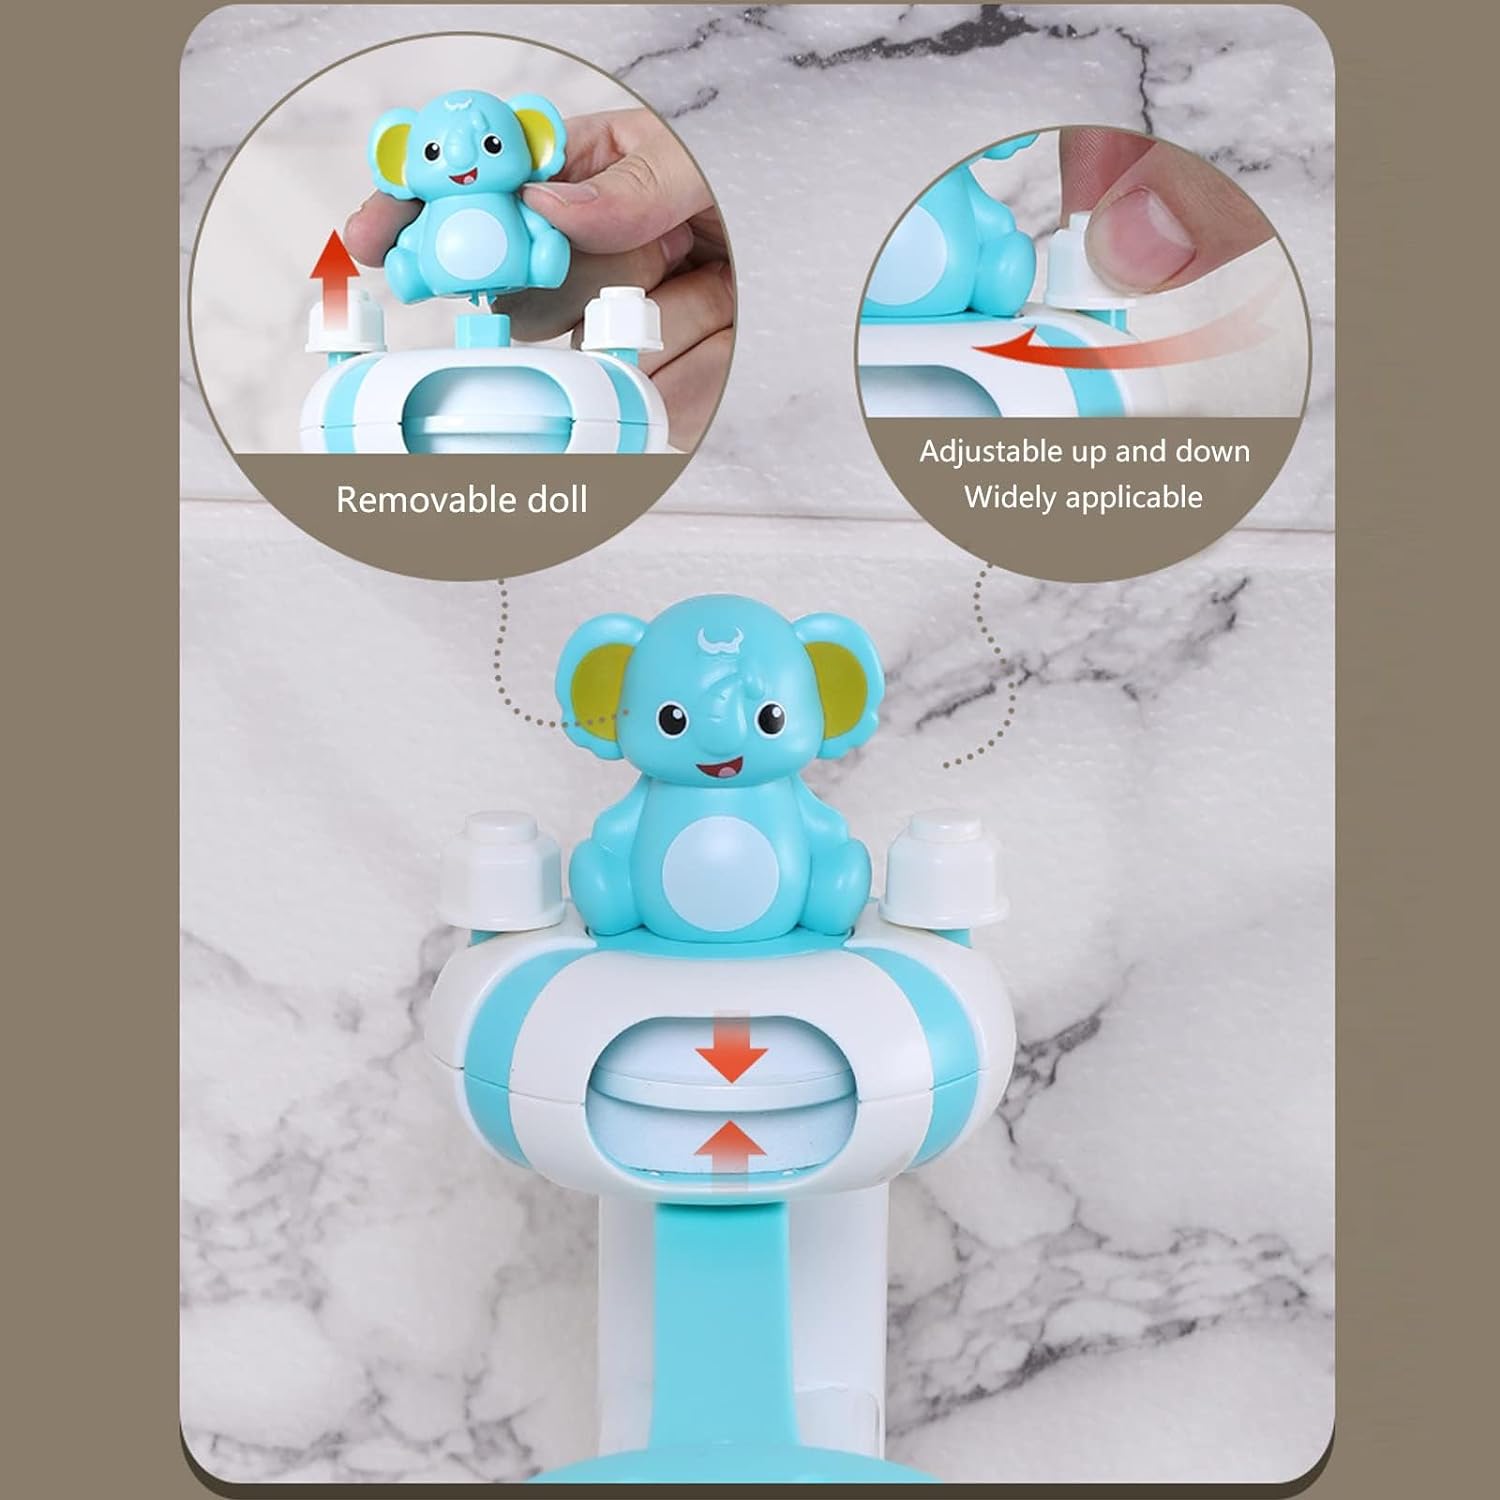 Faucet Extender for Toddlers, Elephants Faucet Handle Extender Set -ABS Material, Cartoon Faucet Extender for Kids Baby - Easy to Use Animal Water Tap Extenders for Toddler Boy Girlb(2 PCS)